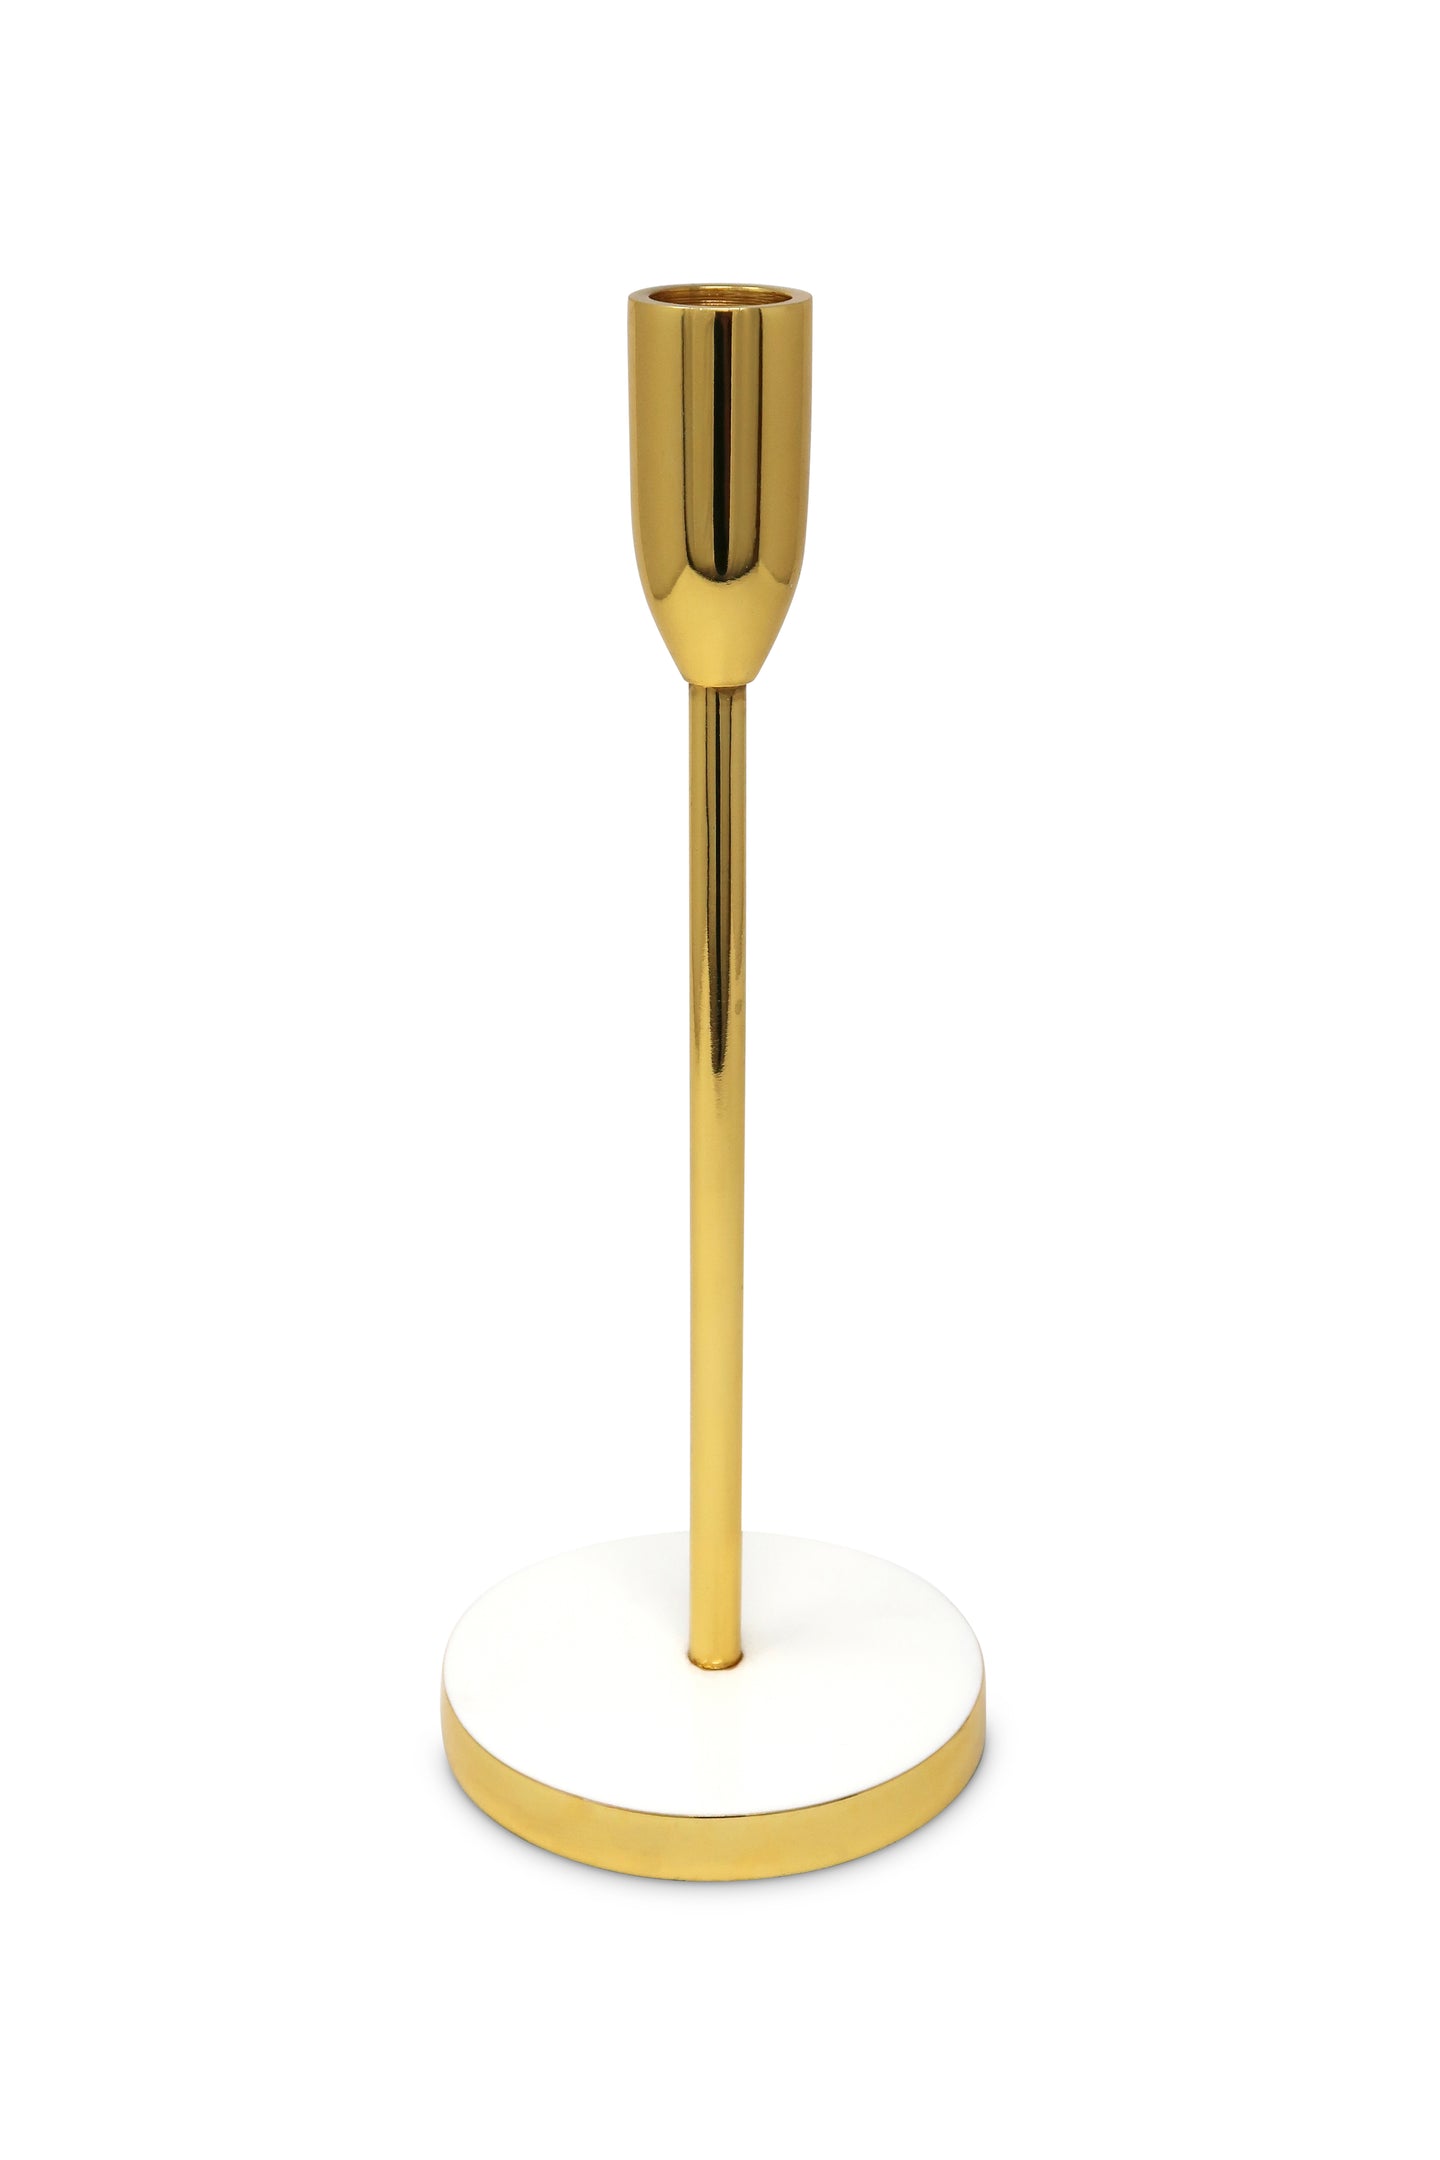 Gold Taper Candle Holder on White Marble Base - 10